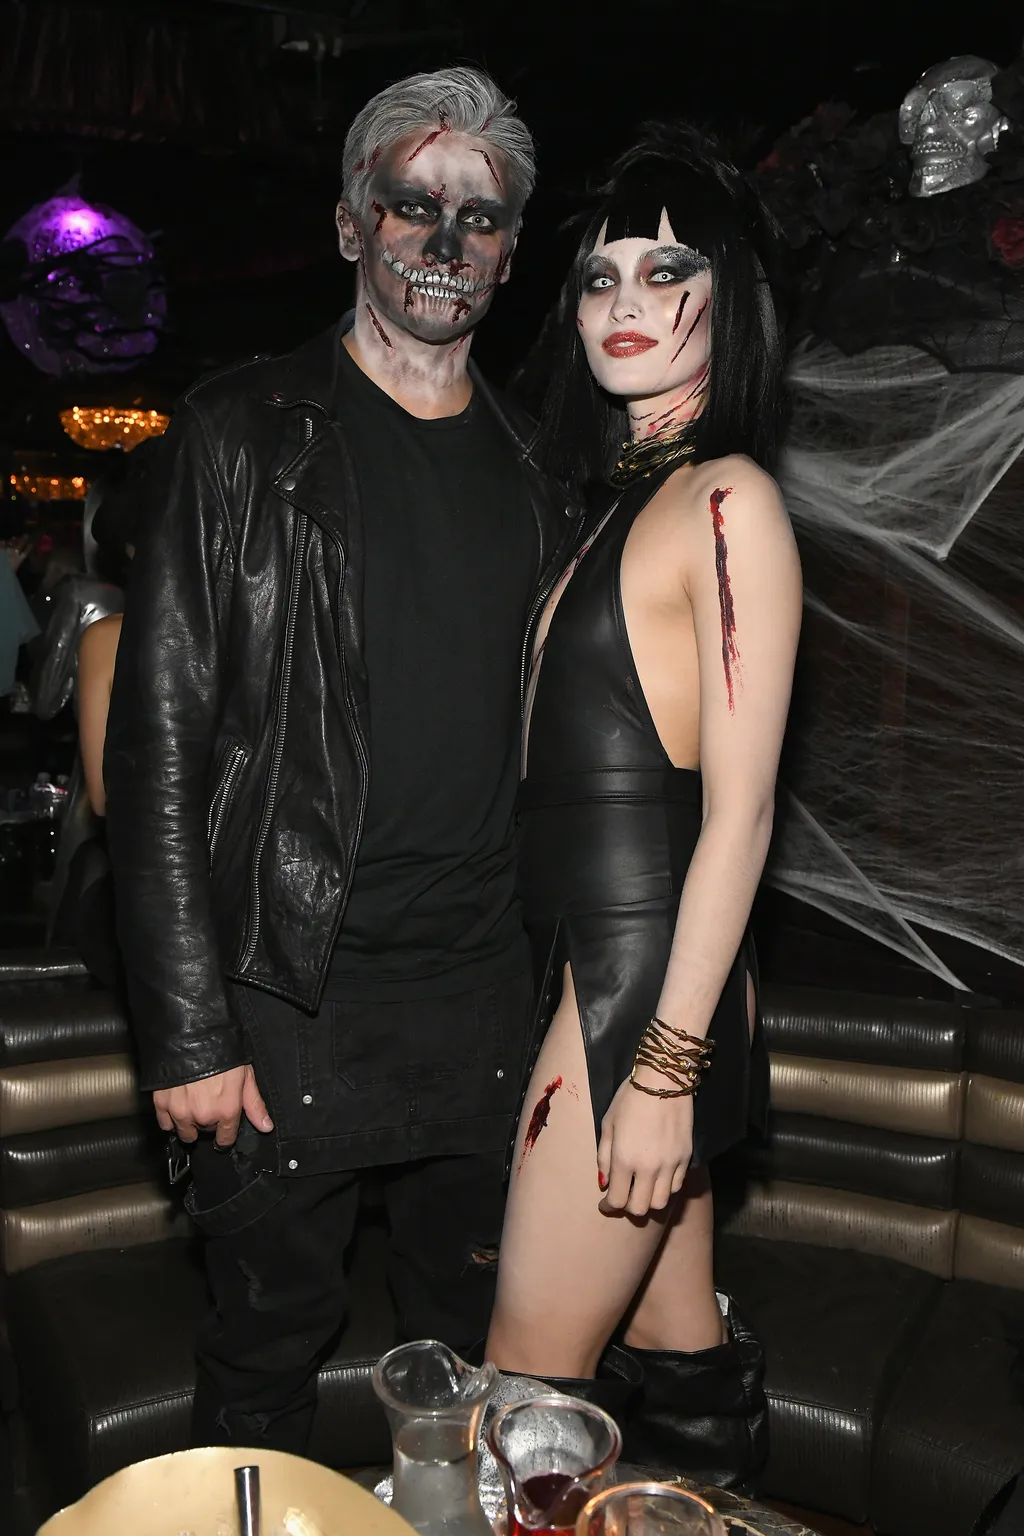 Heidi Klum's 19th Annual Halloween Party Sponsored By SVEDKA Vodka And Party City At Lavo NYC GettyImageRank2 